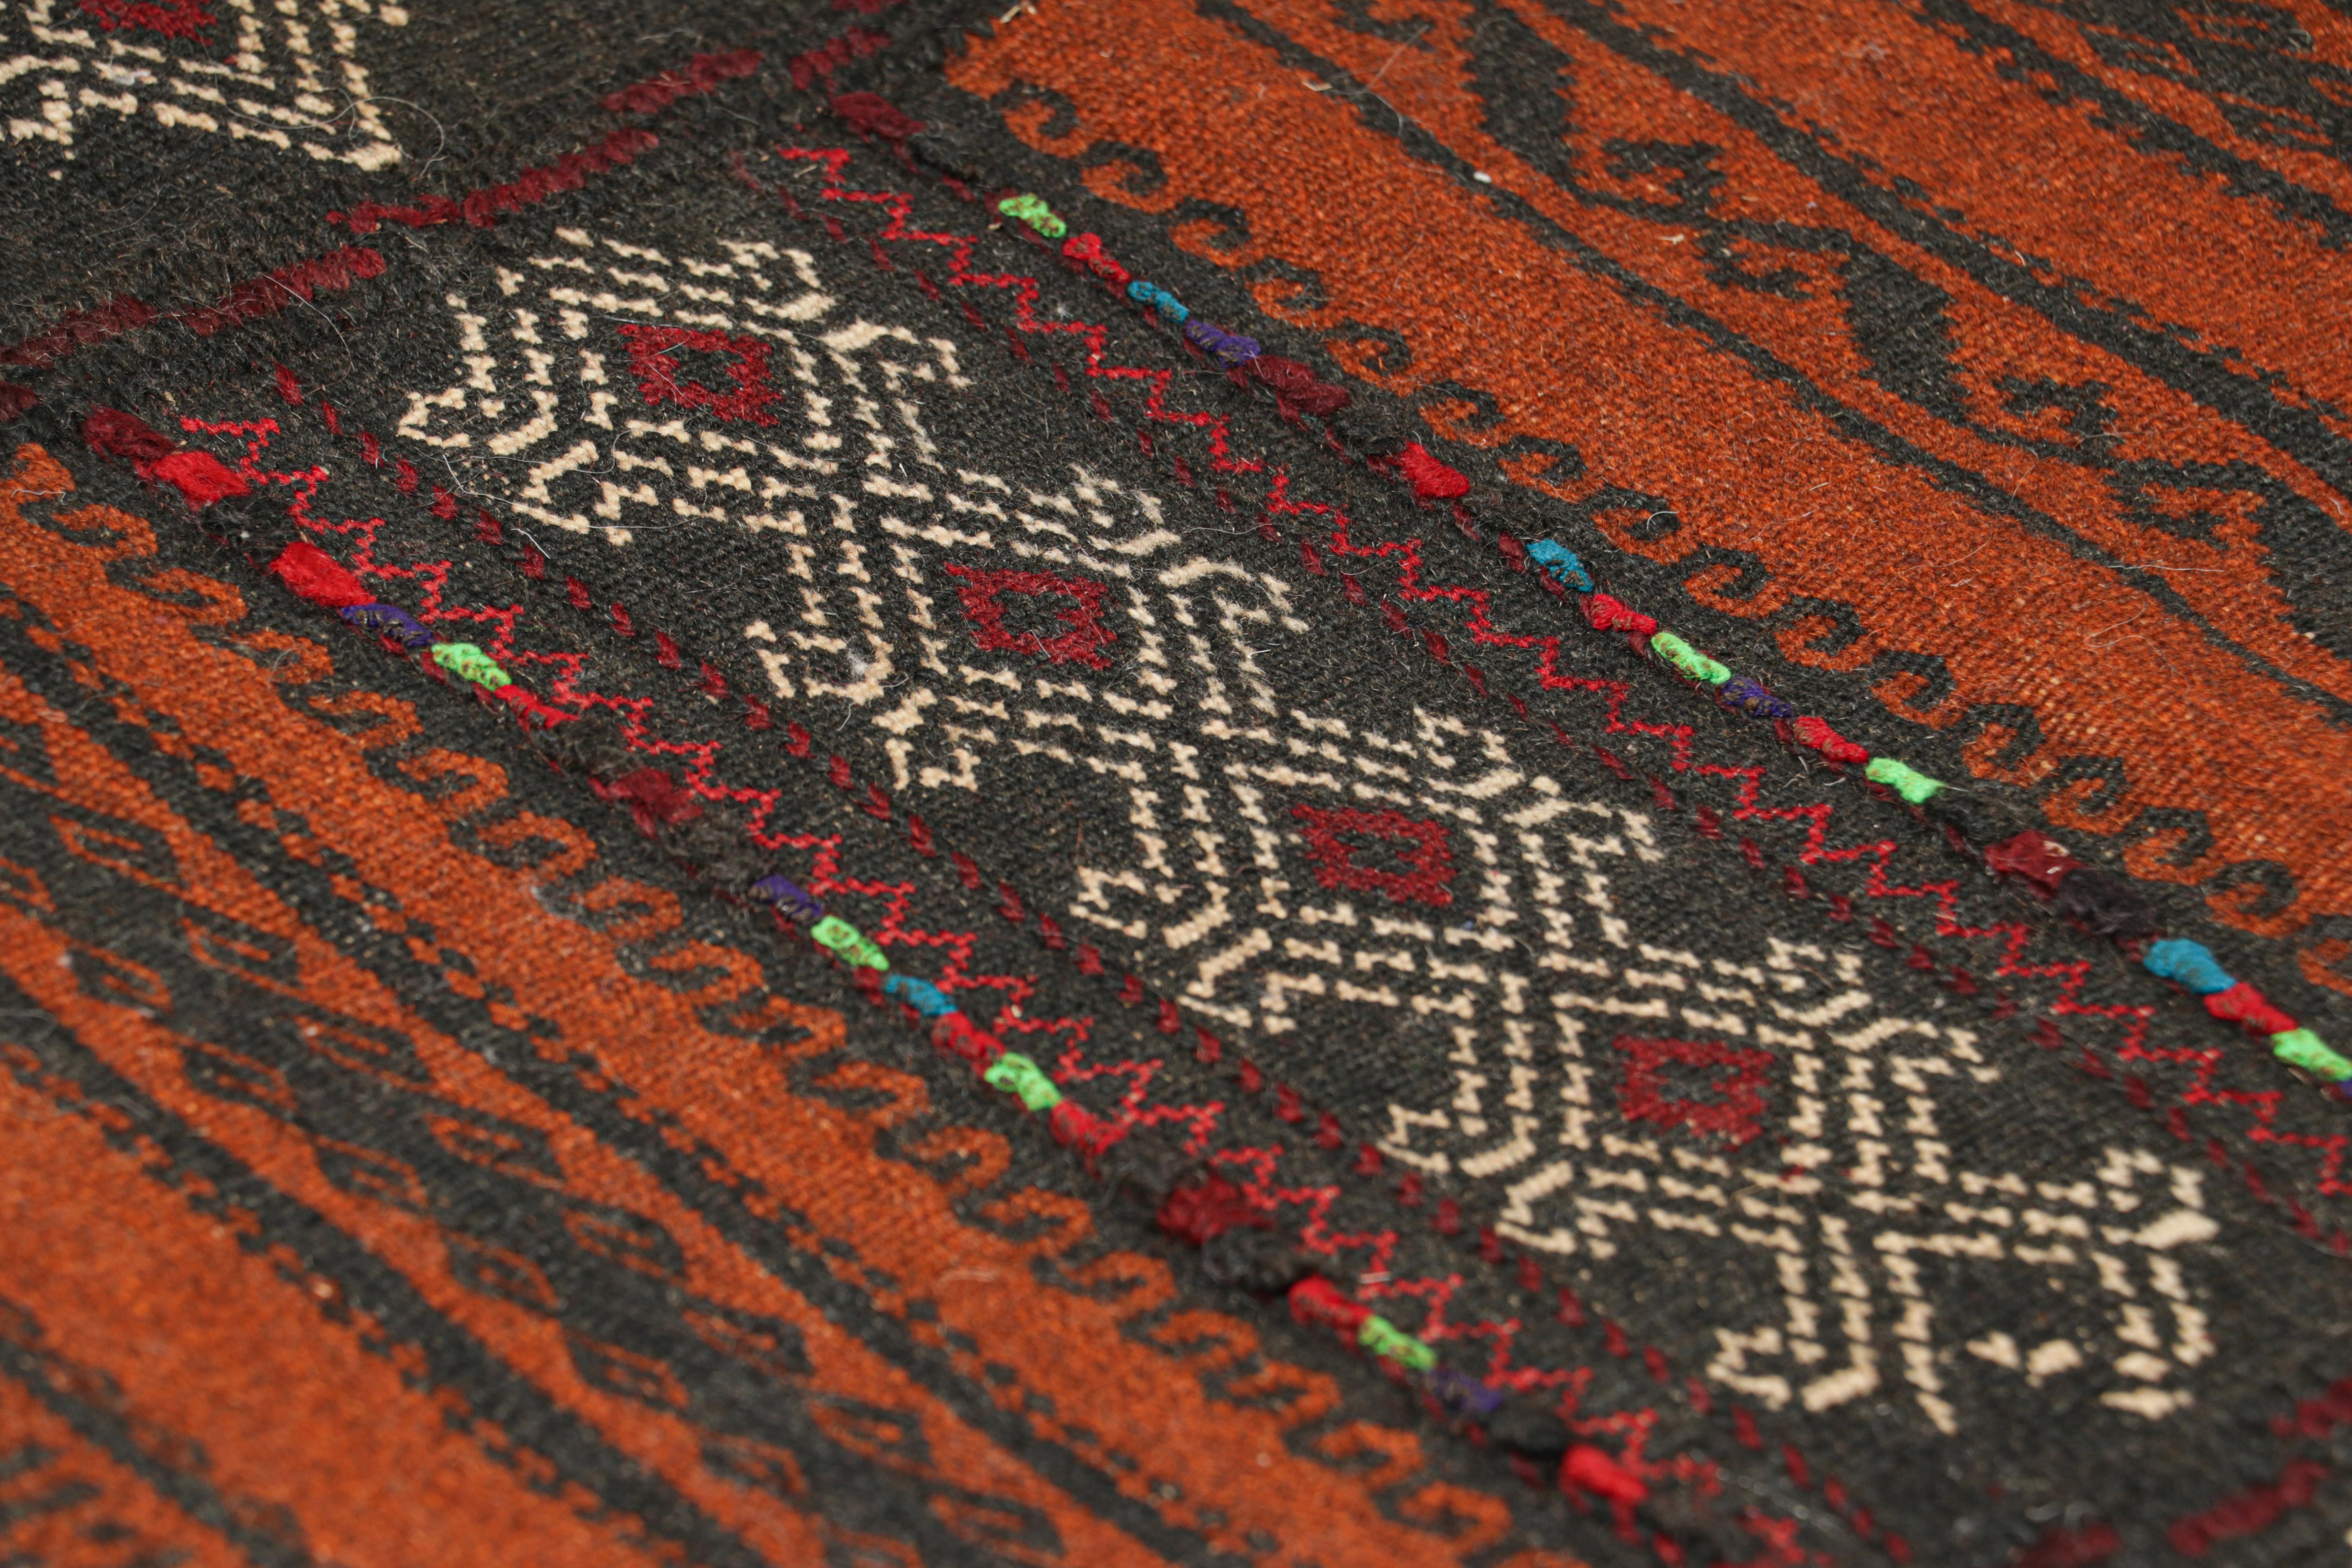 Handwoven in wool, circa 1950-1960, this 2x5 vintage Afghan tribal kilim, is a collectible tribal piece that may have been used as table covers in nomadic daily life, much similar to Persian Sofreh Kilims.

On the Design: 

Drawing on Afghan tribal